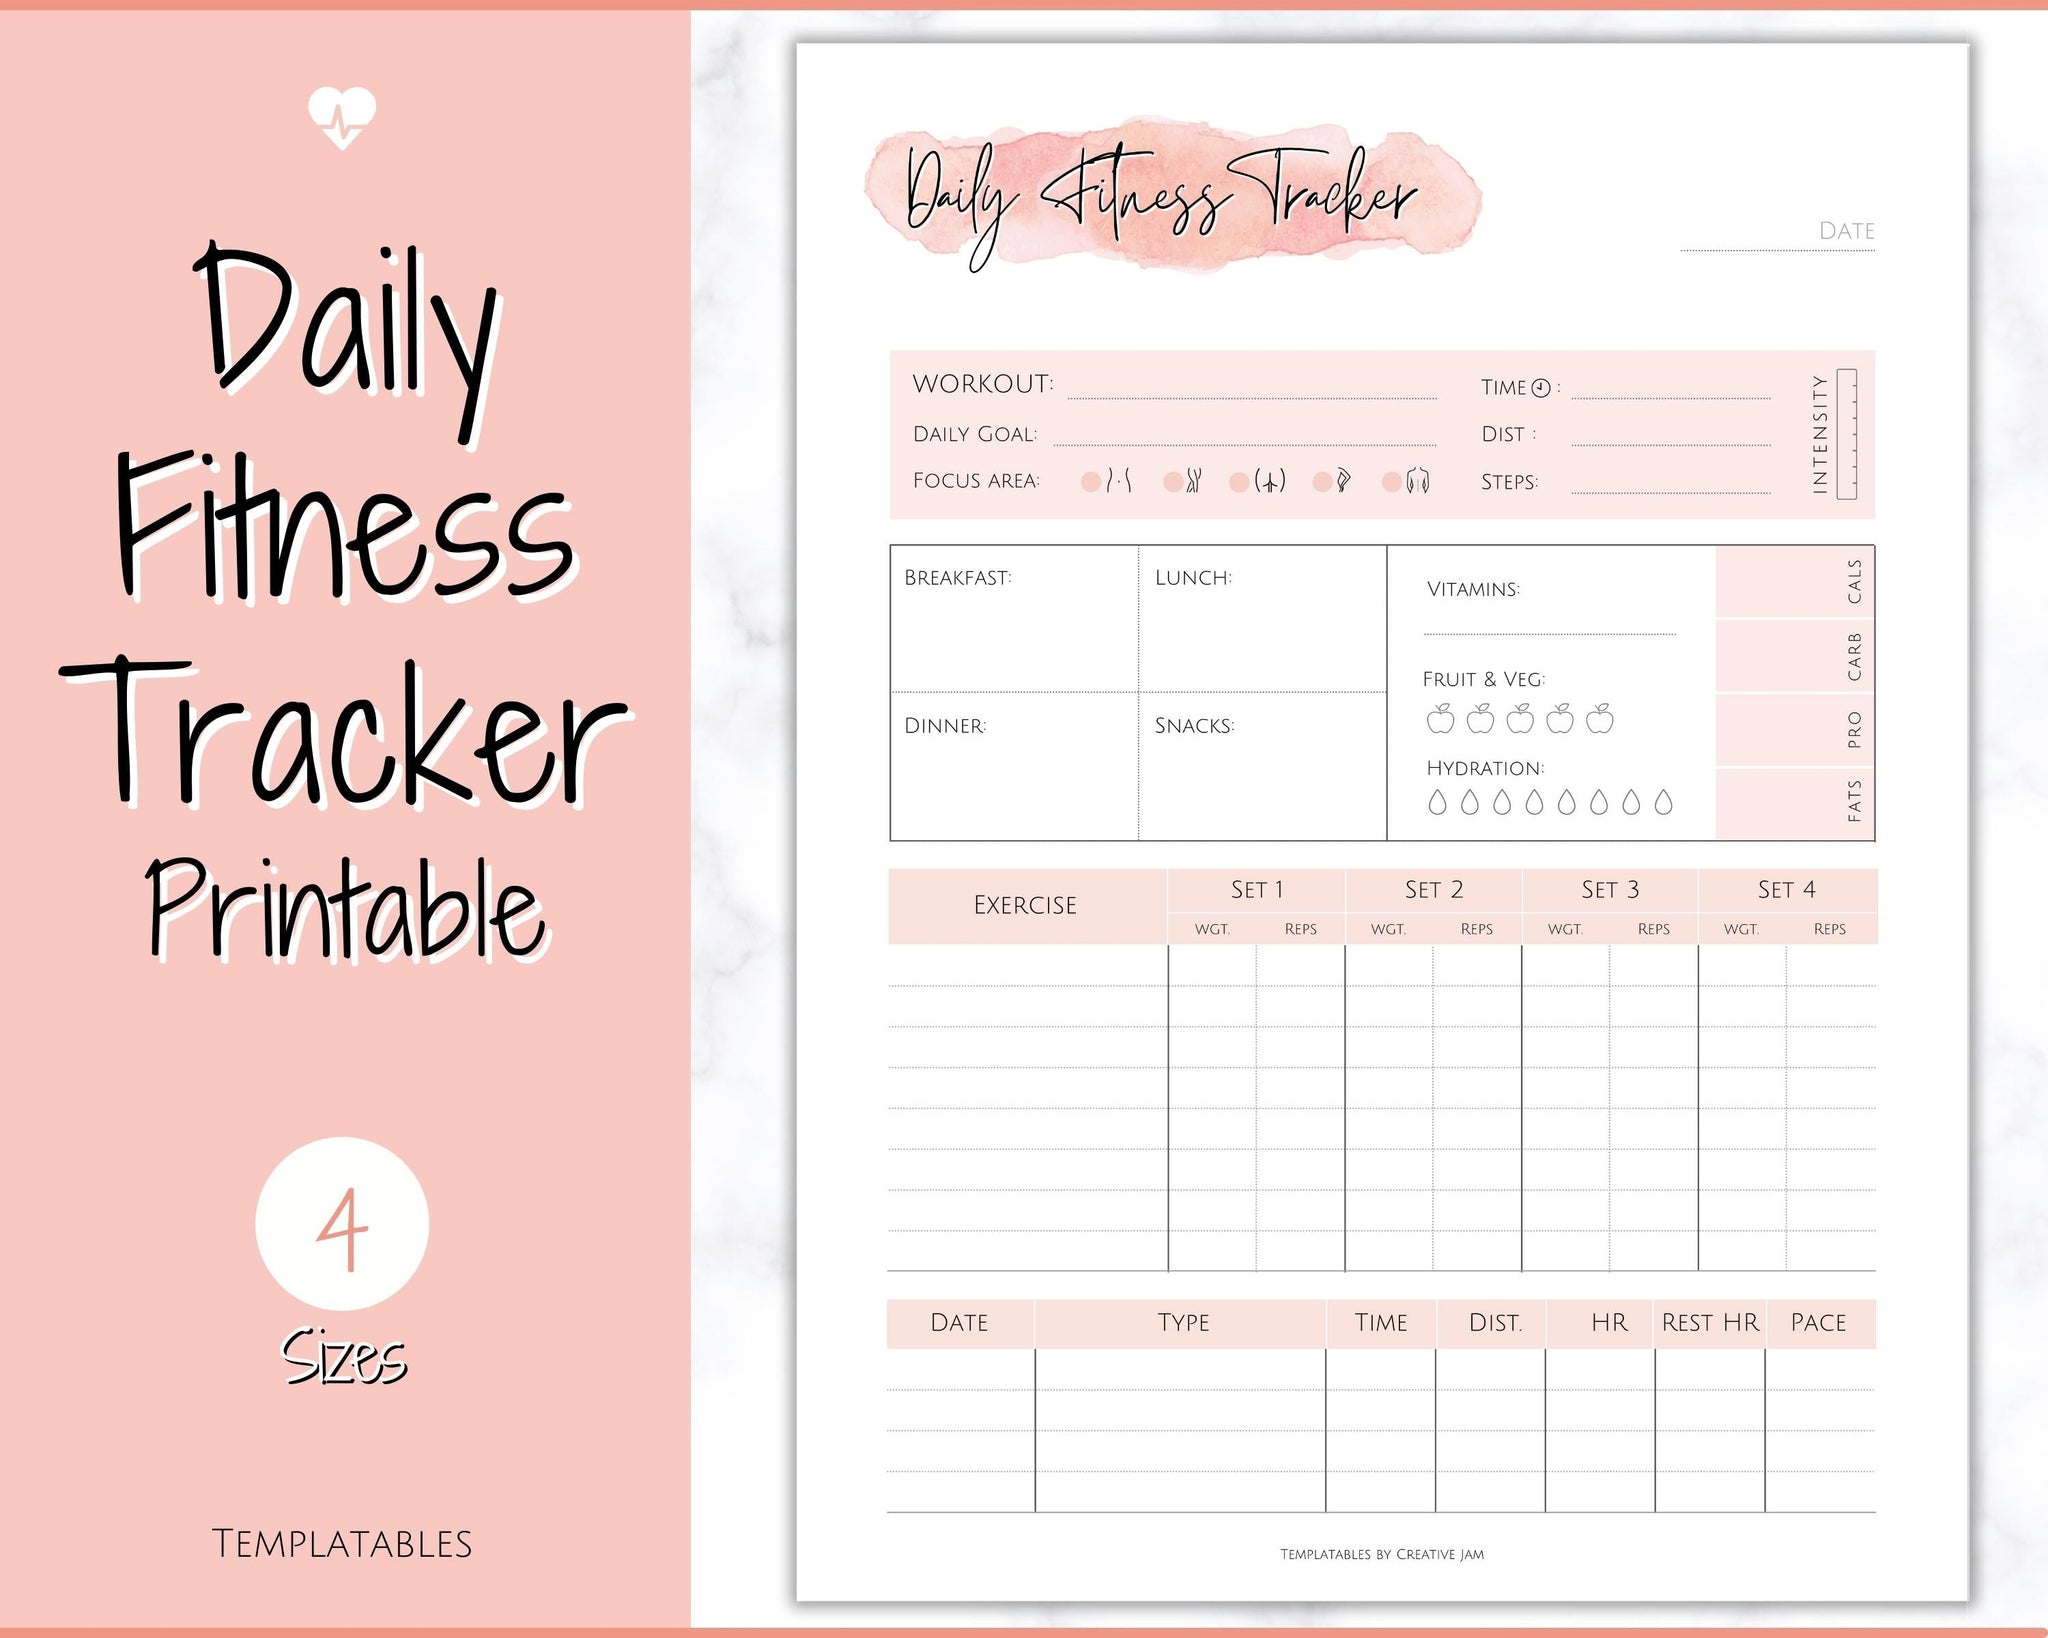 Workout Journal | Day-By-Day Workout Planner | Get It